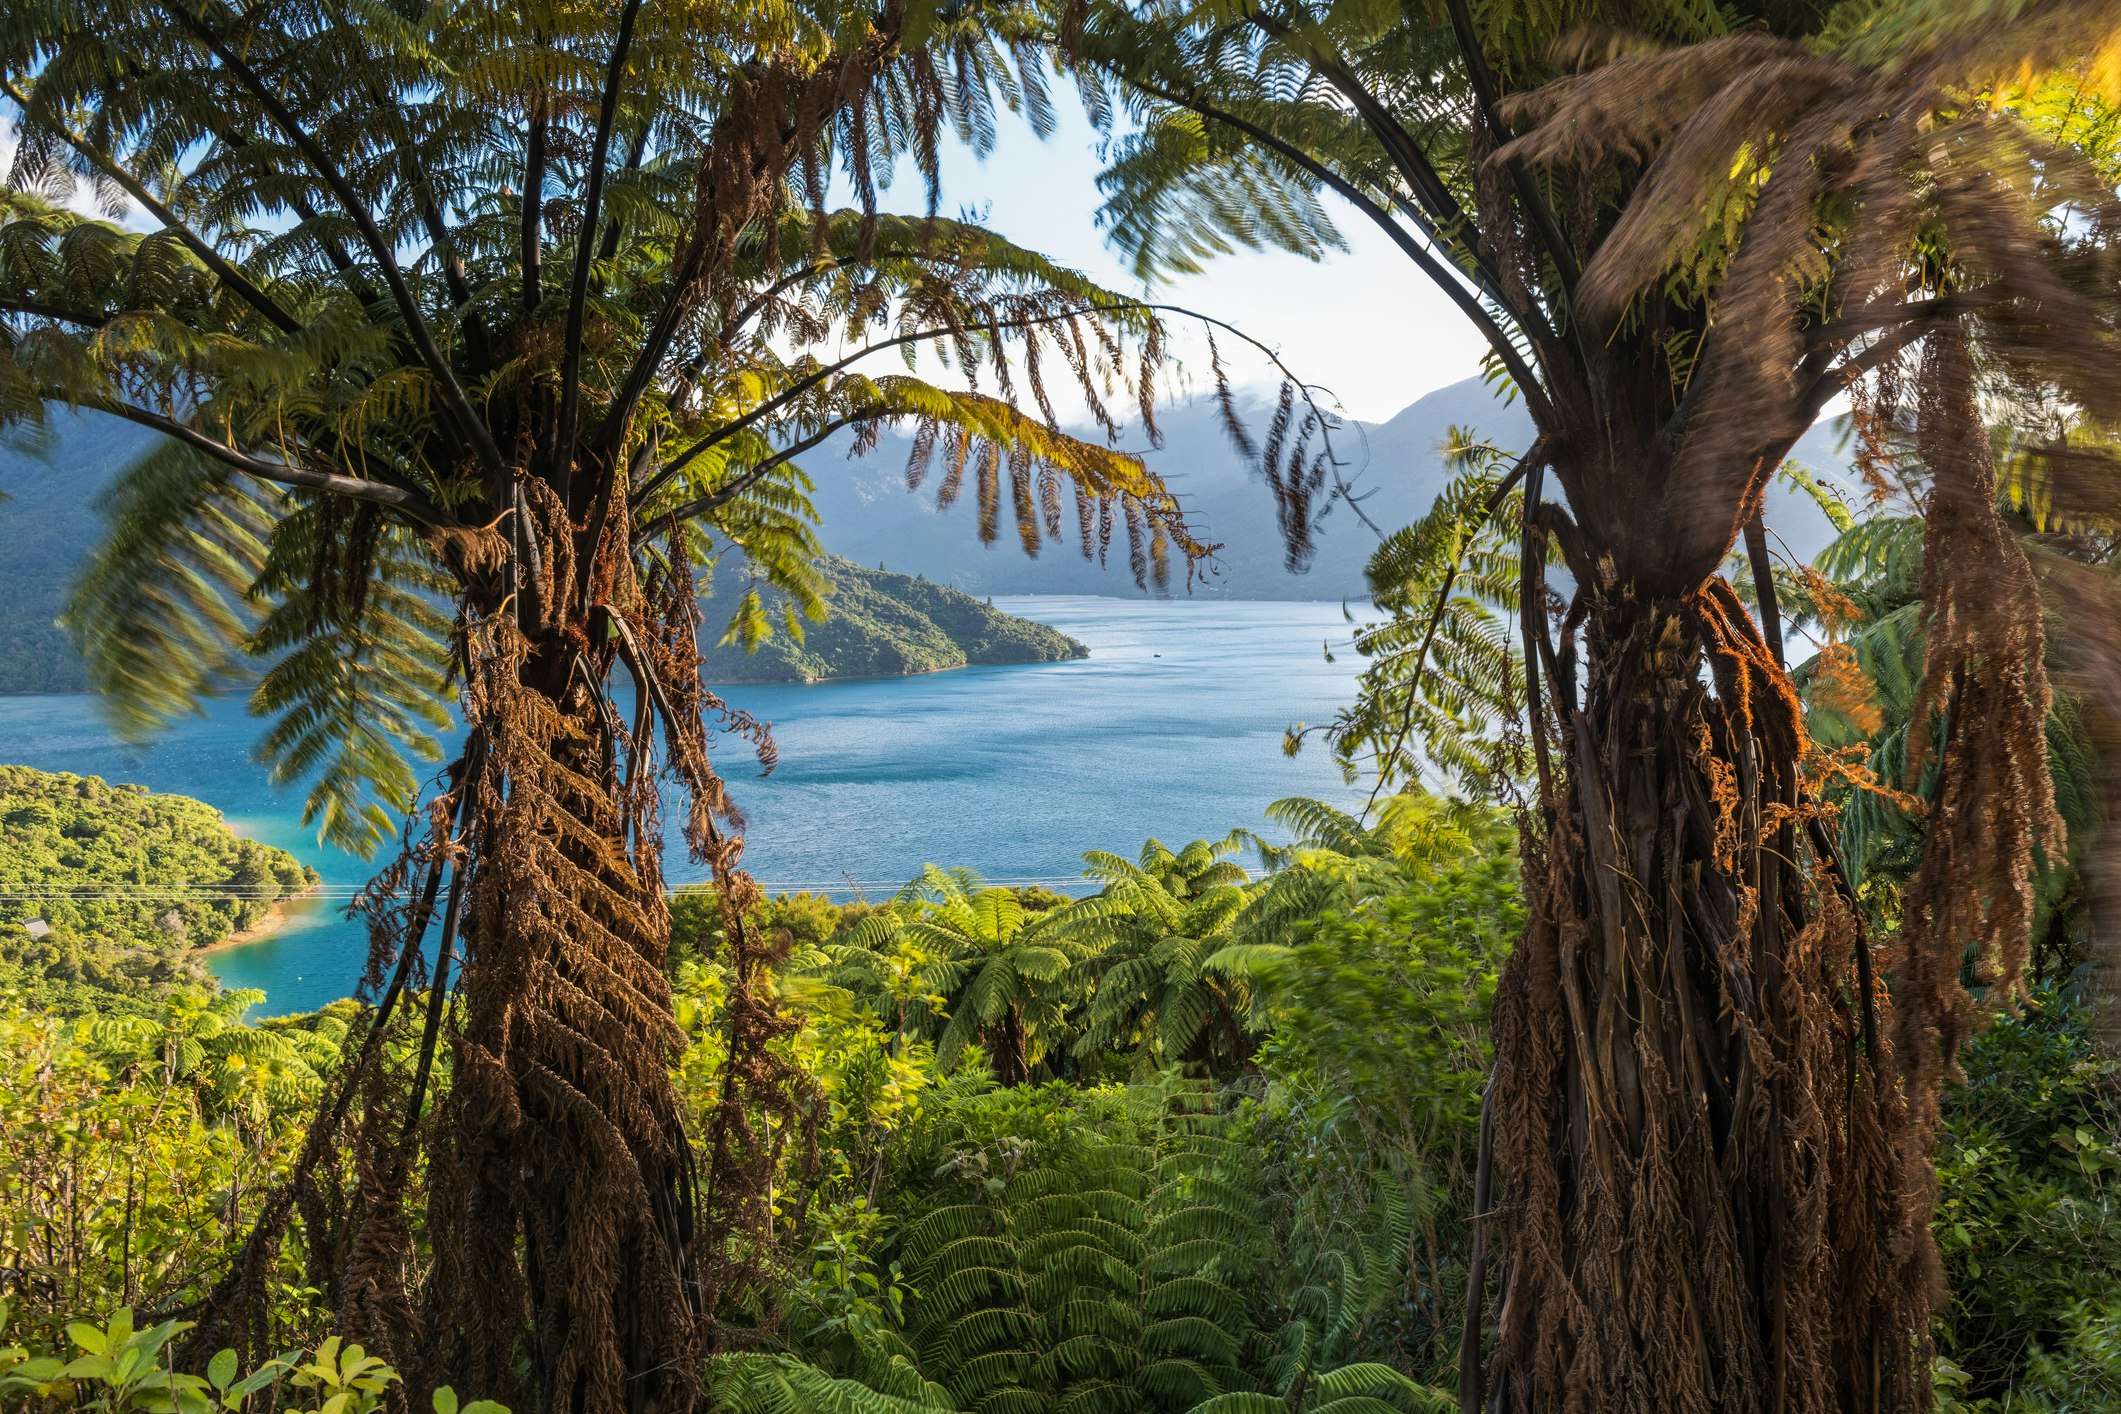 Ancient cyatheaceae trees frame a bright blue harbor surrounded by blueish gray mountains, tree-lined hilly shore, and lower stands of bright green tropical foliage